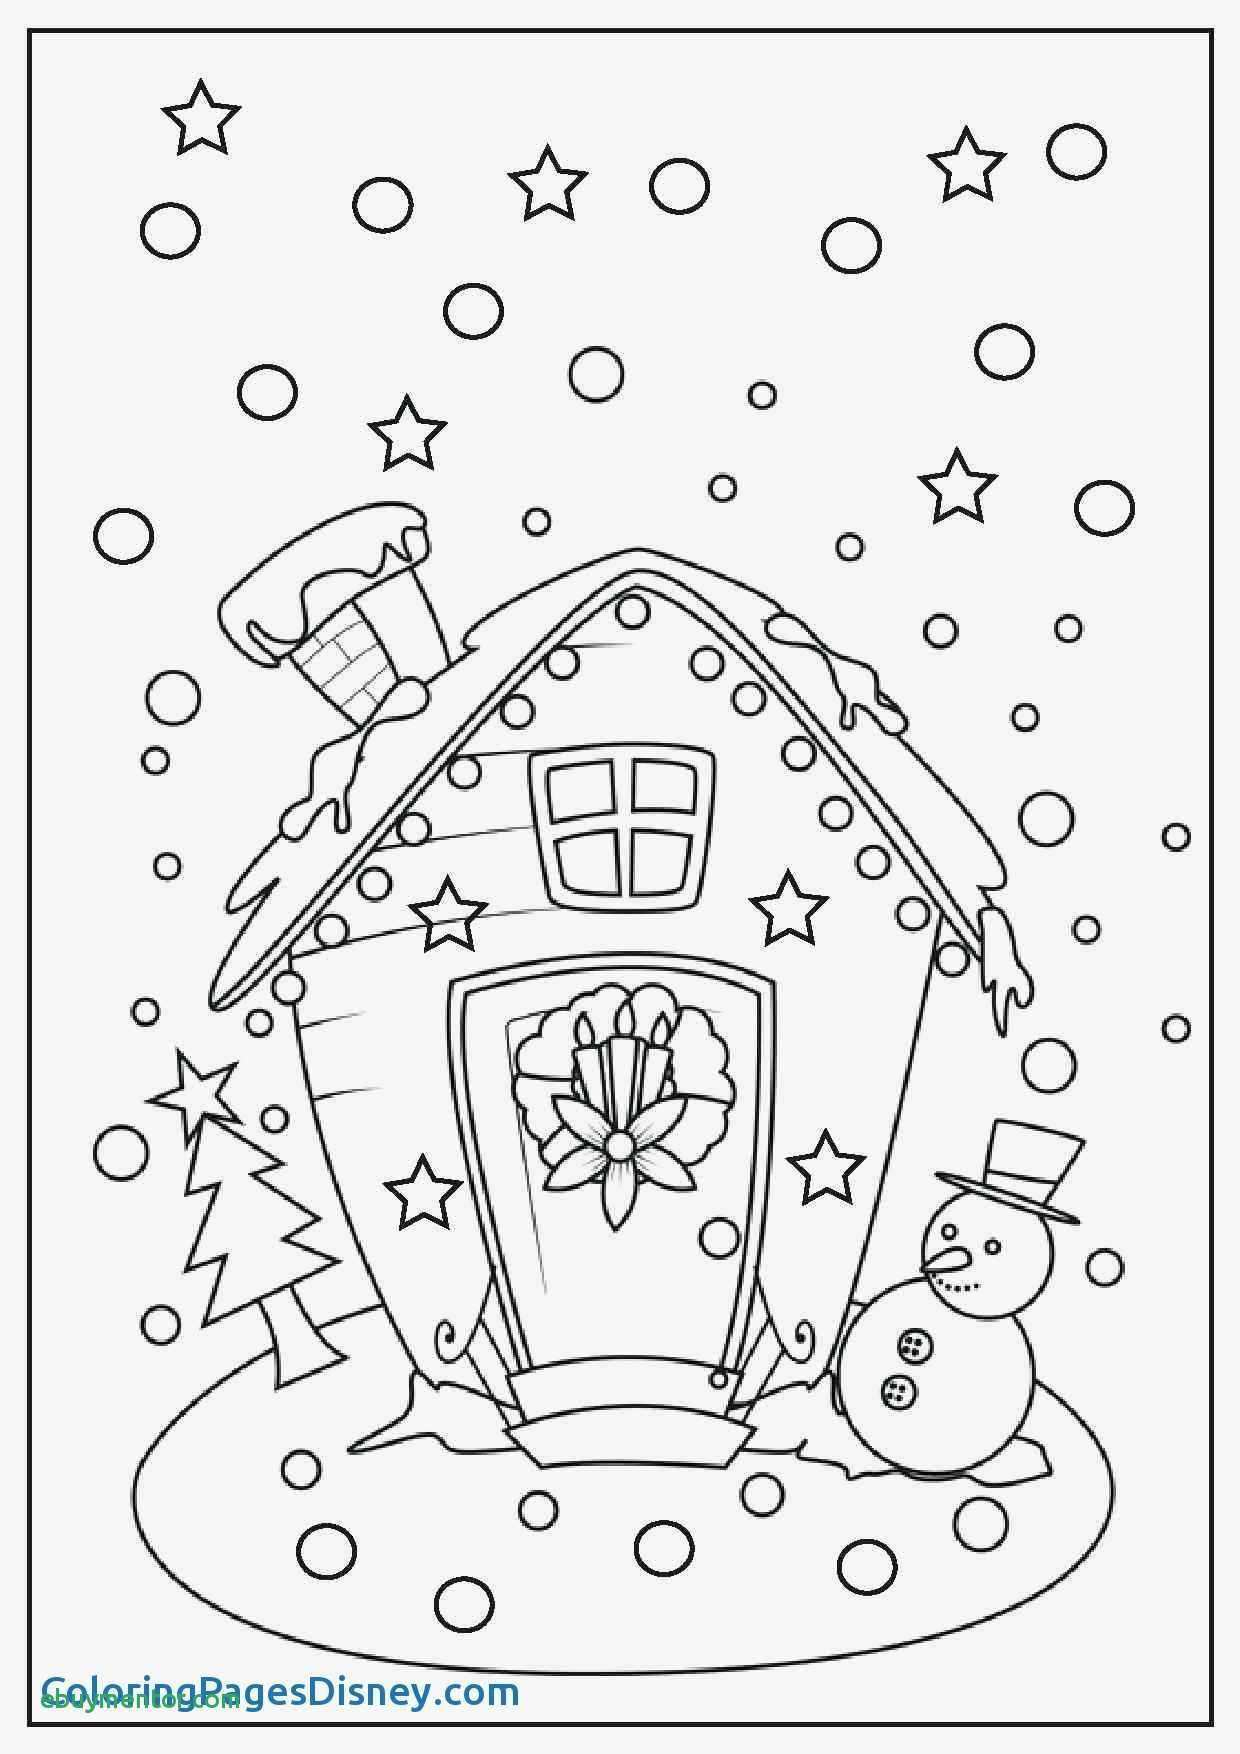 Barnabas Coloring Page Coloring Books Of The Bible Coloring Book Answers In Genesis 674